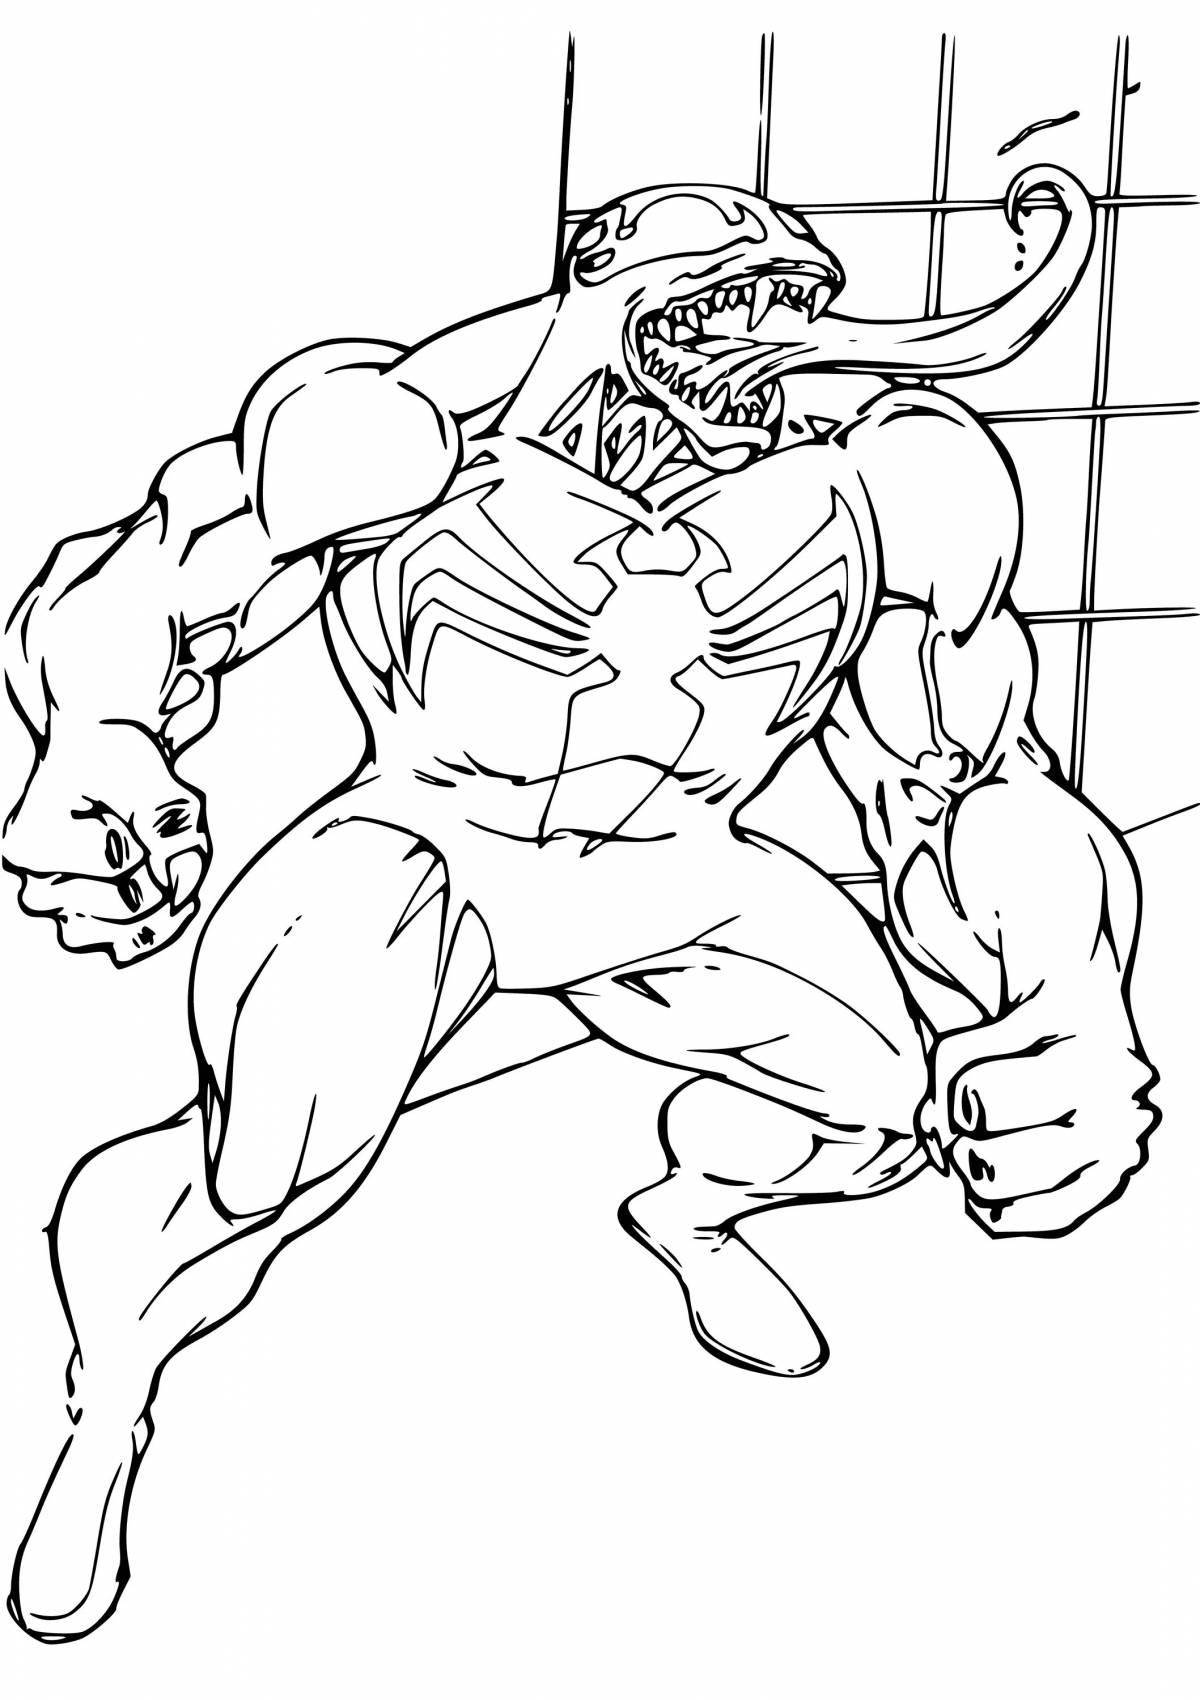 Spider-Man bright symbiote coloring page